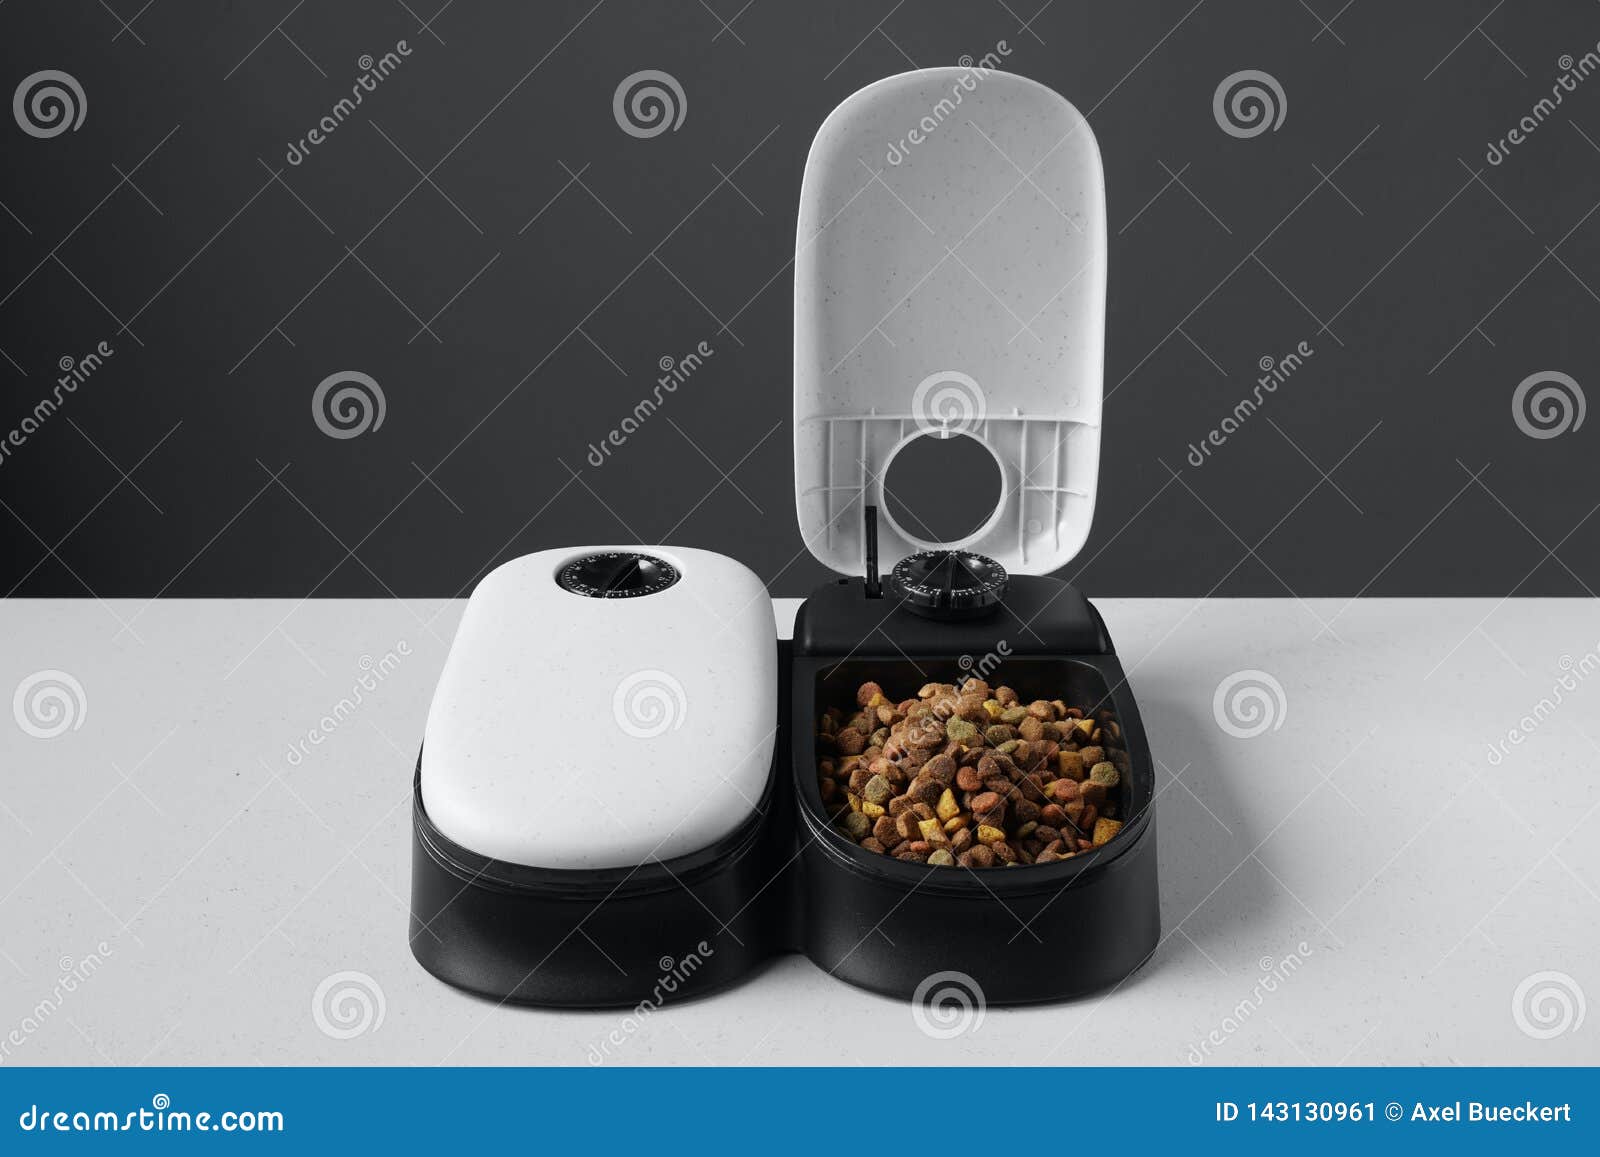 automatic cat food dispenser or feeder